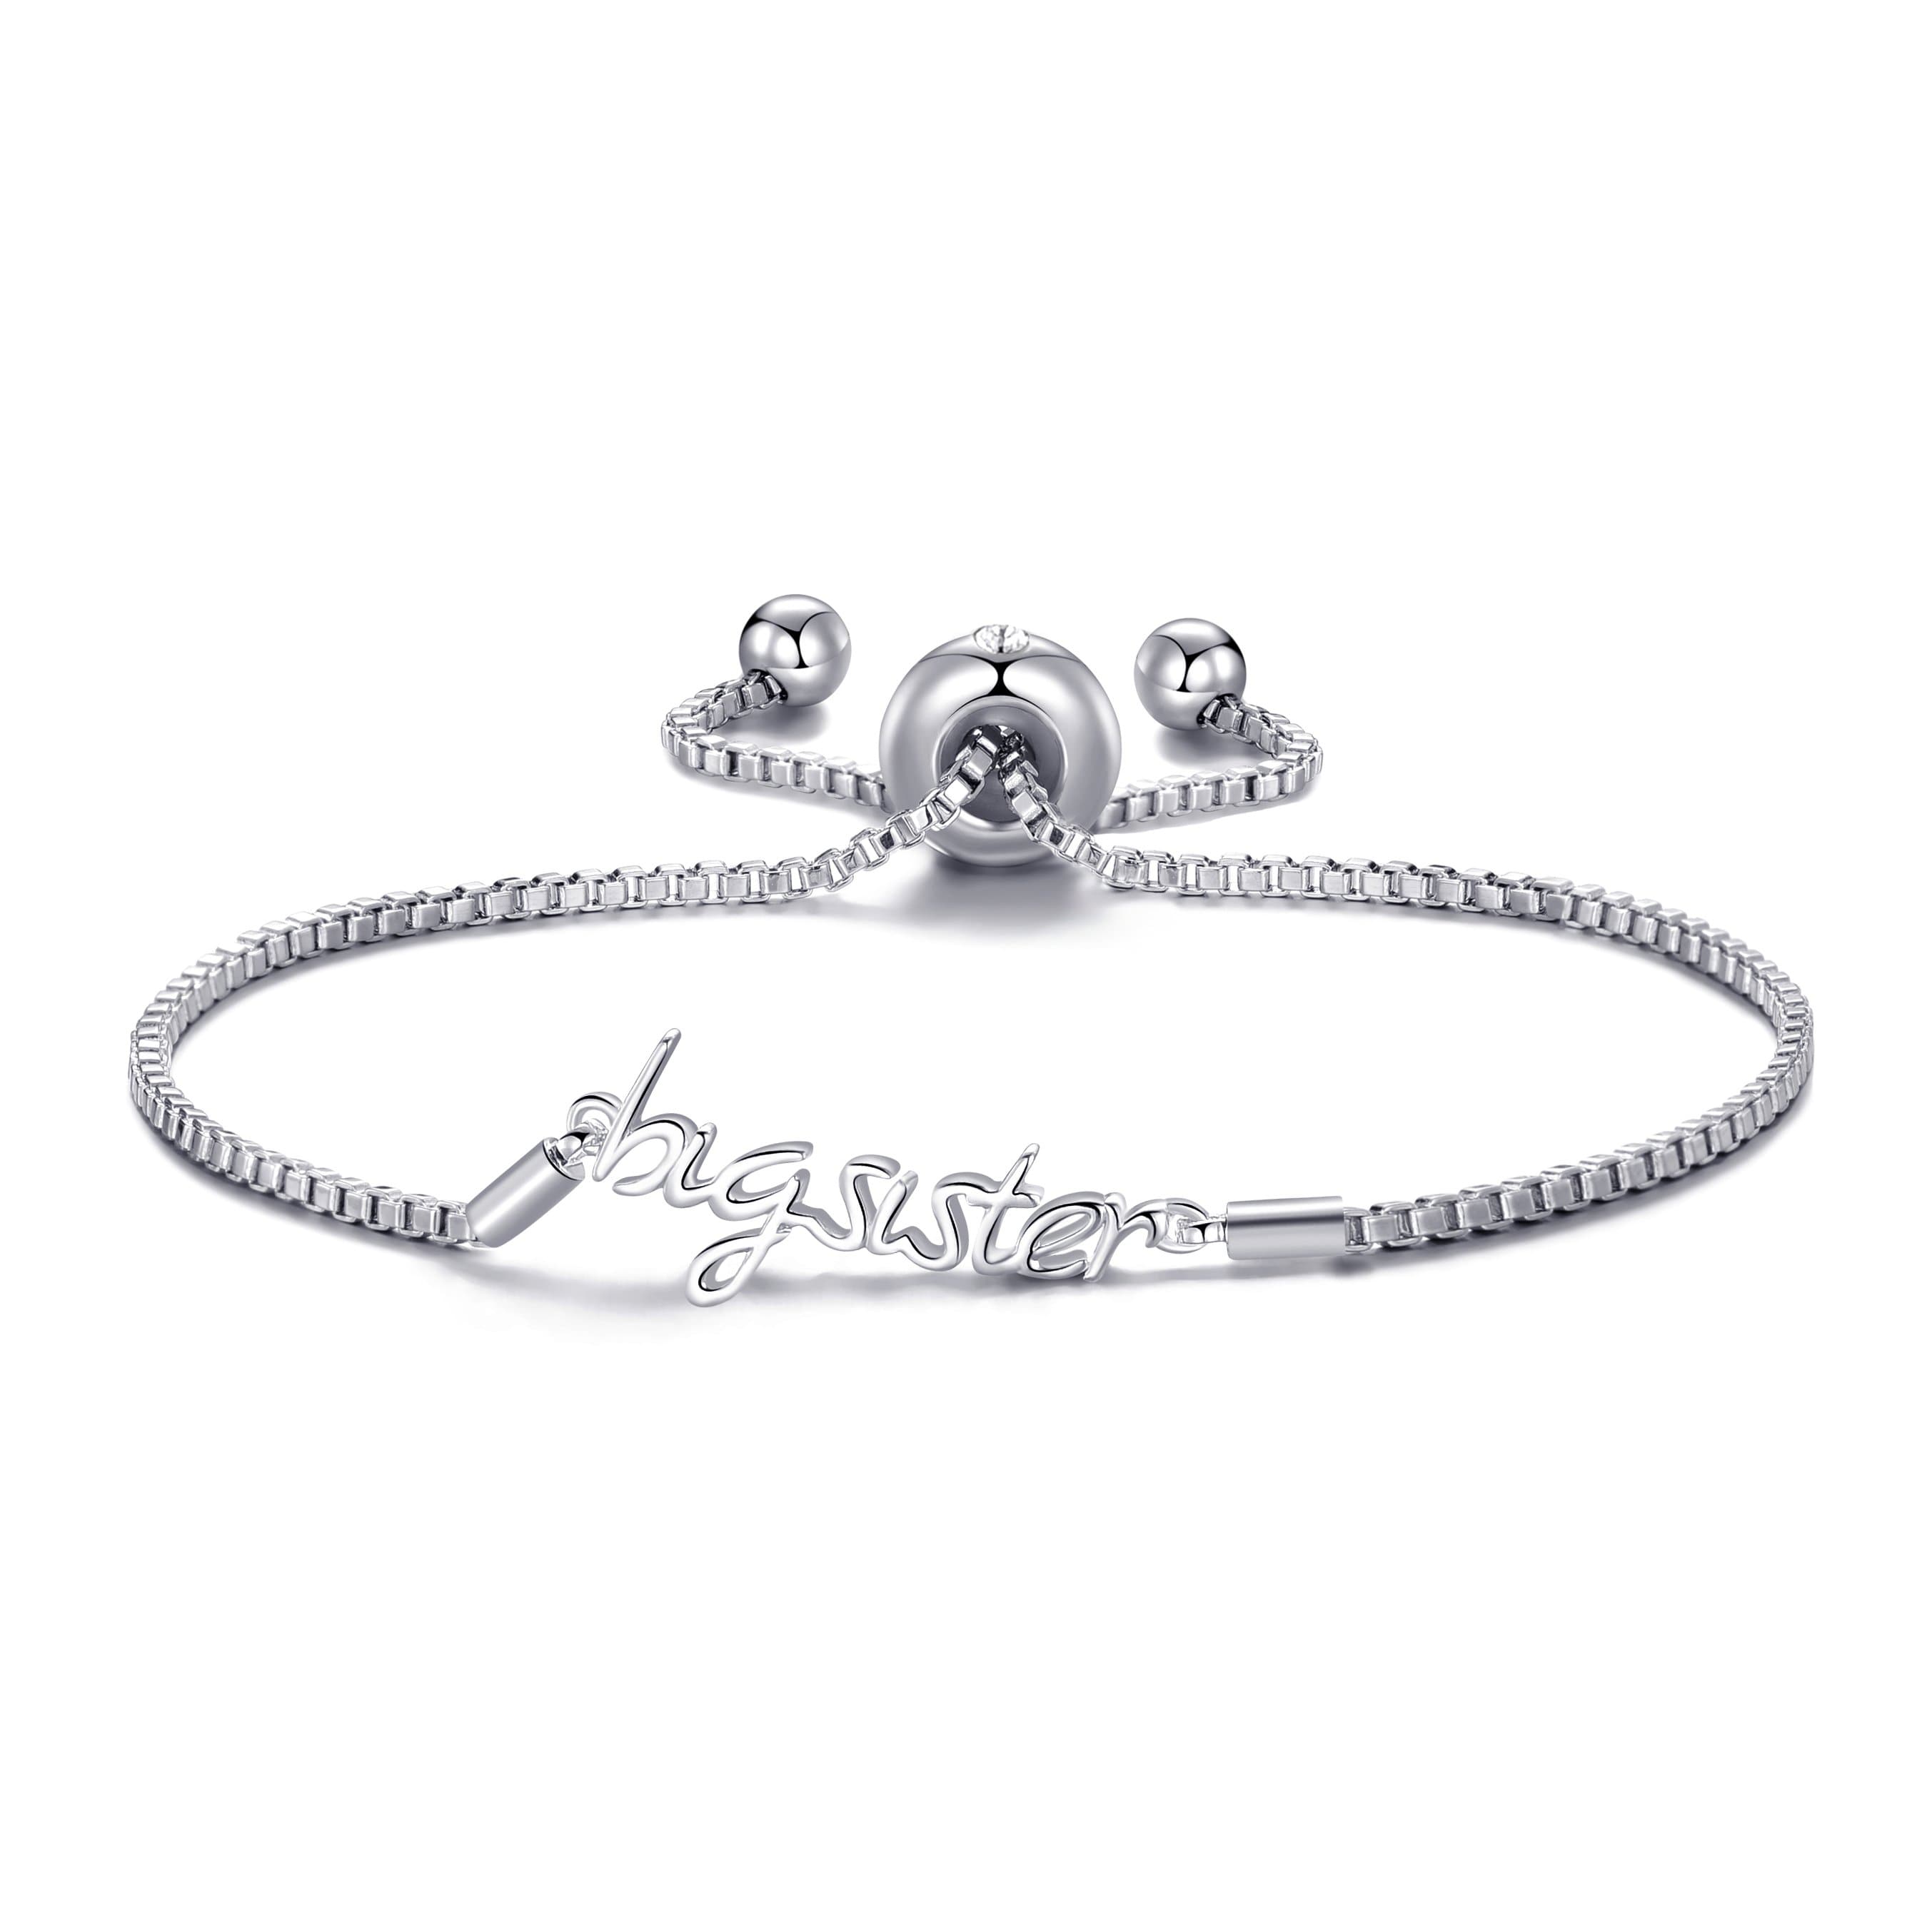 Silver Plated Big Sister Bracelet Created with Zircondia® Crystals by Philip Jones Jewellery